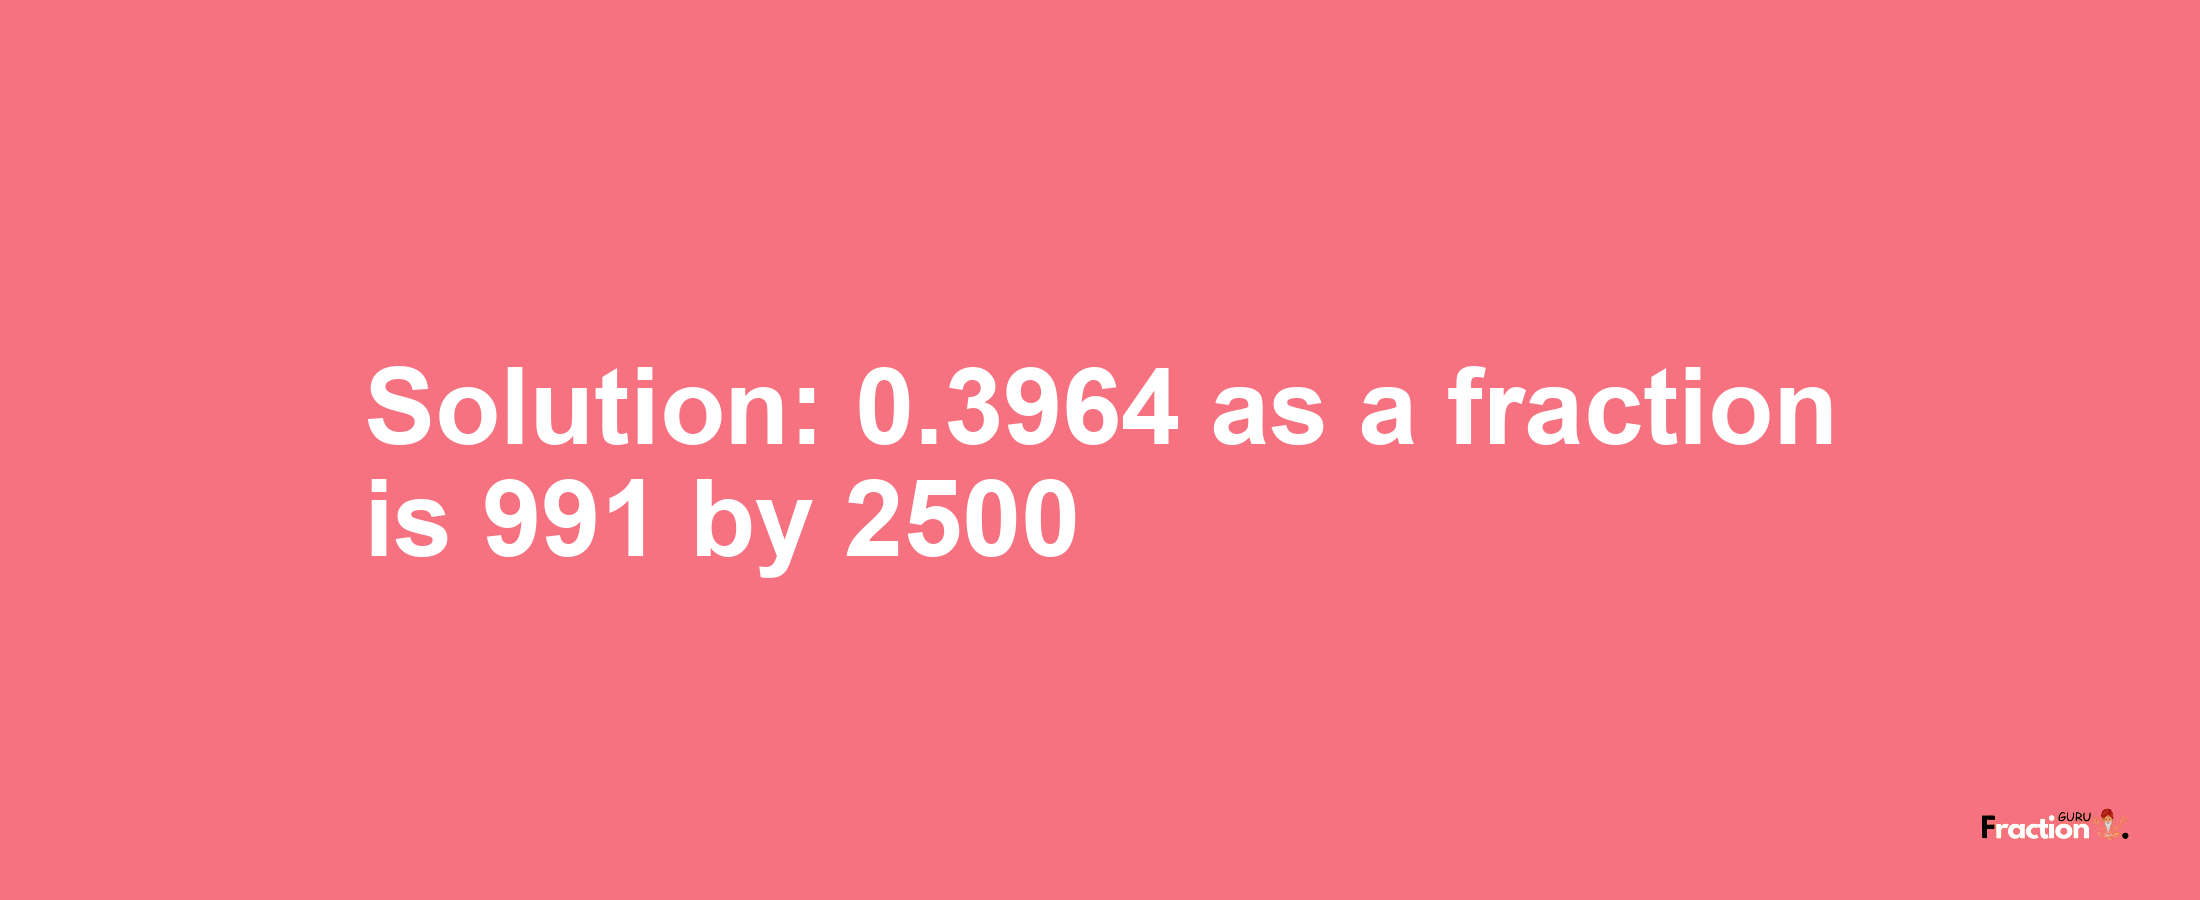 Solution:0.3964 as a fraction is 991/2500